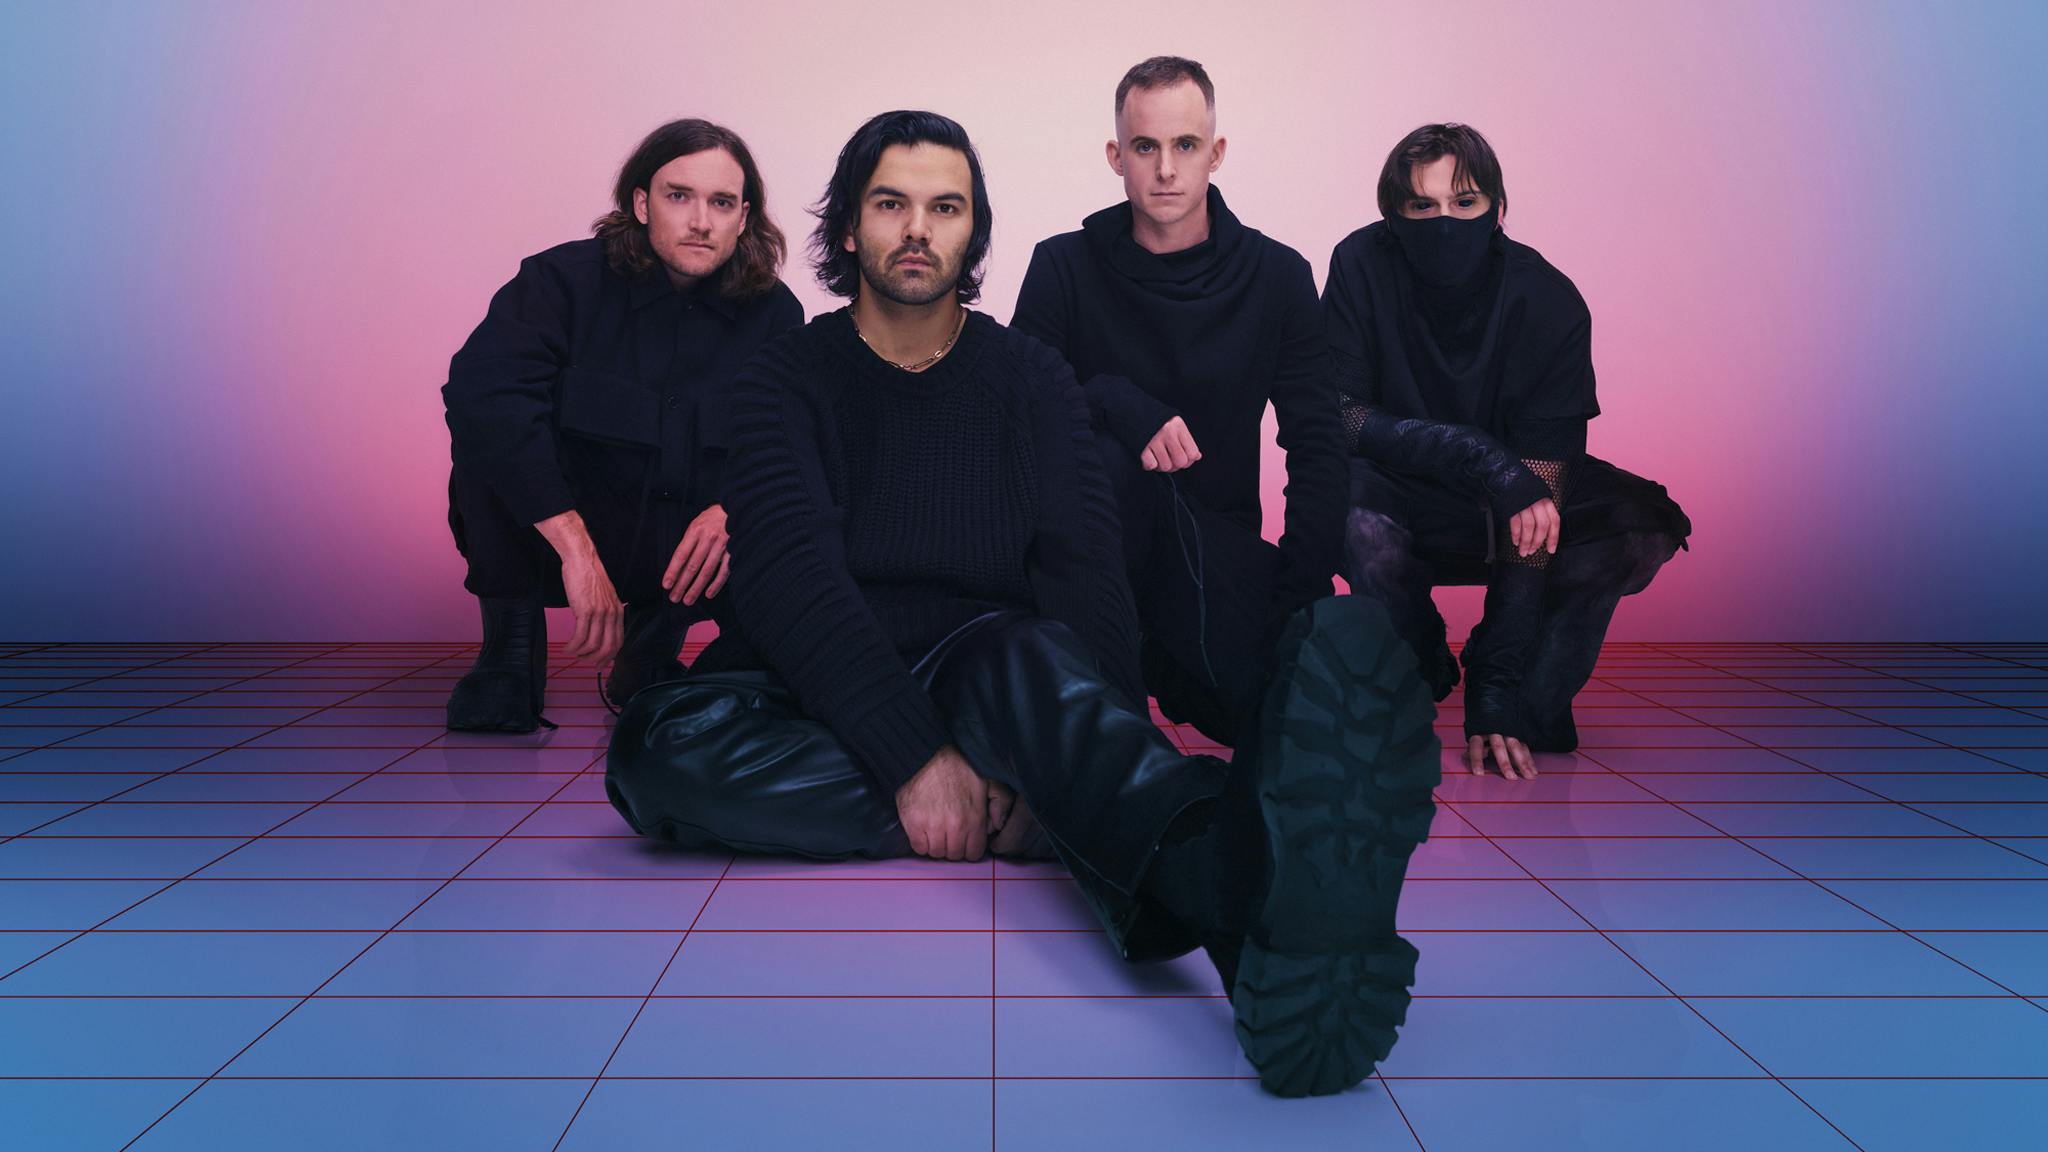 Northlane drop new single Dante, which was originally conceived as a dance track